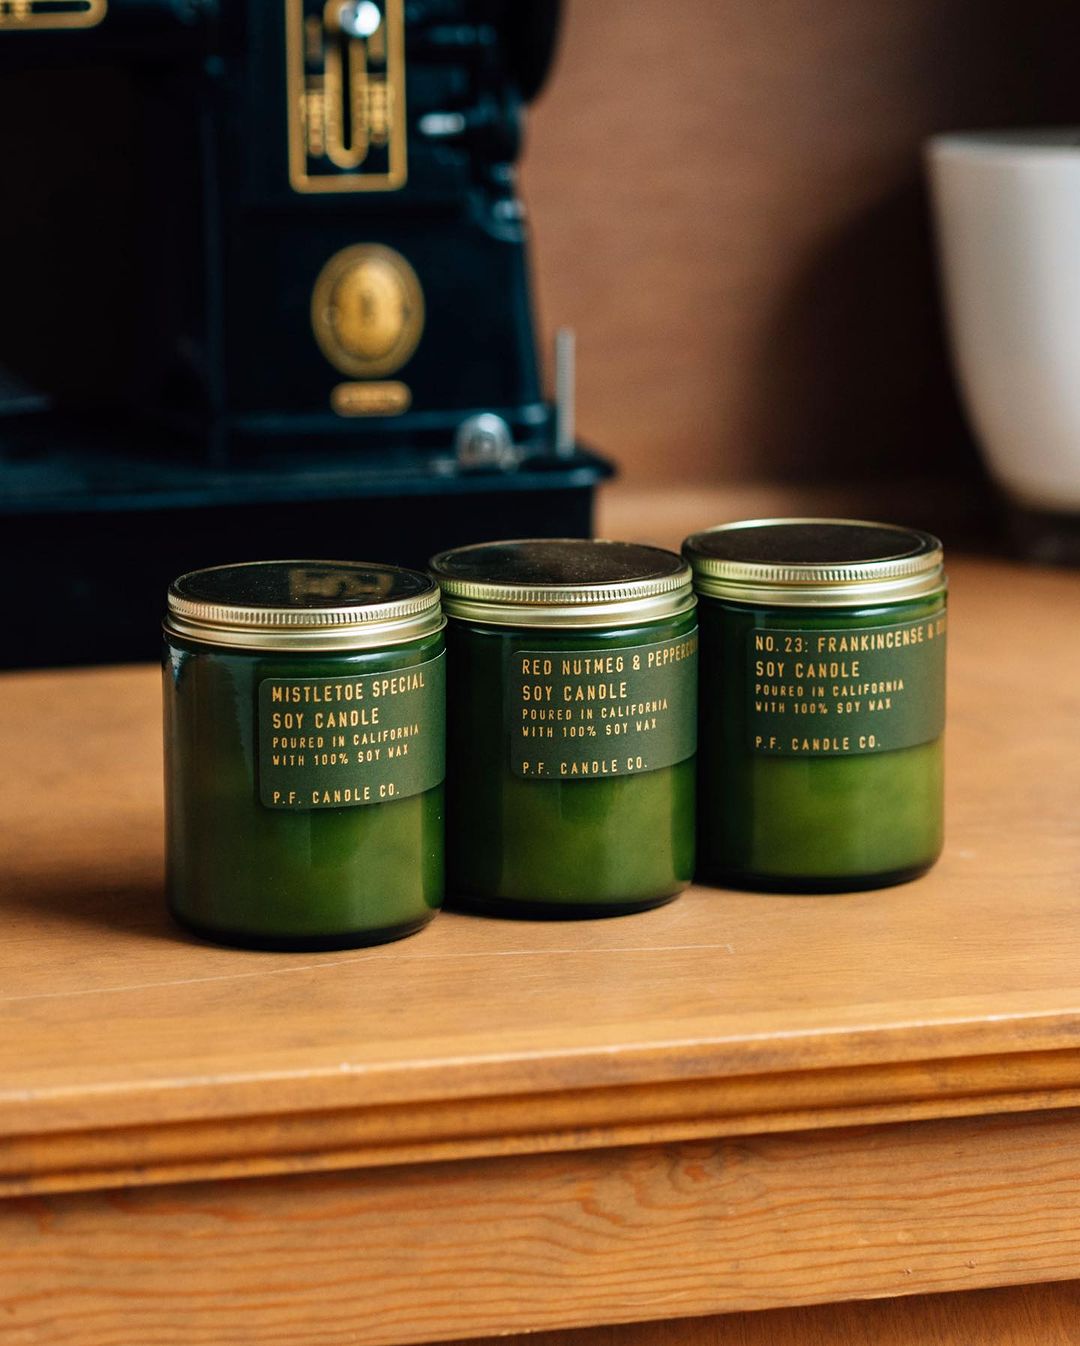 P.F. Candle Co. vegan candles